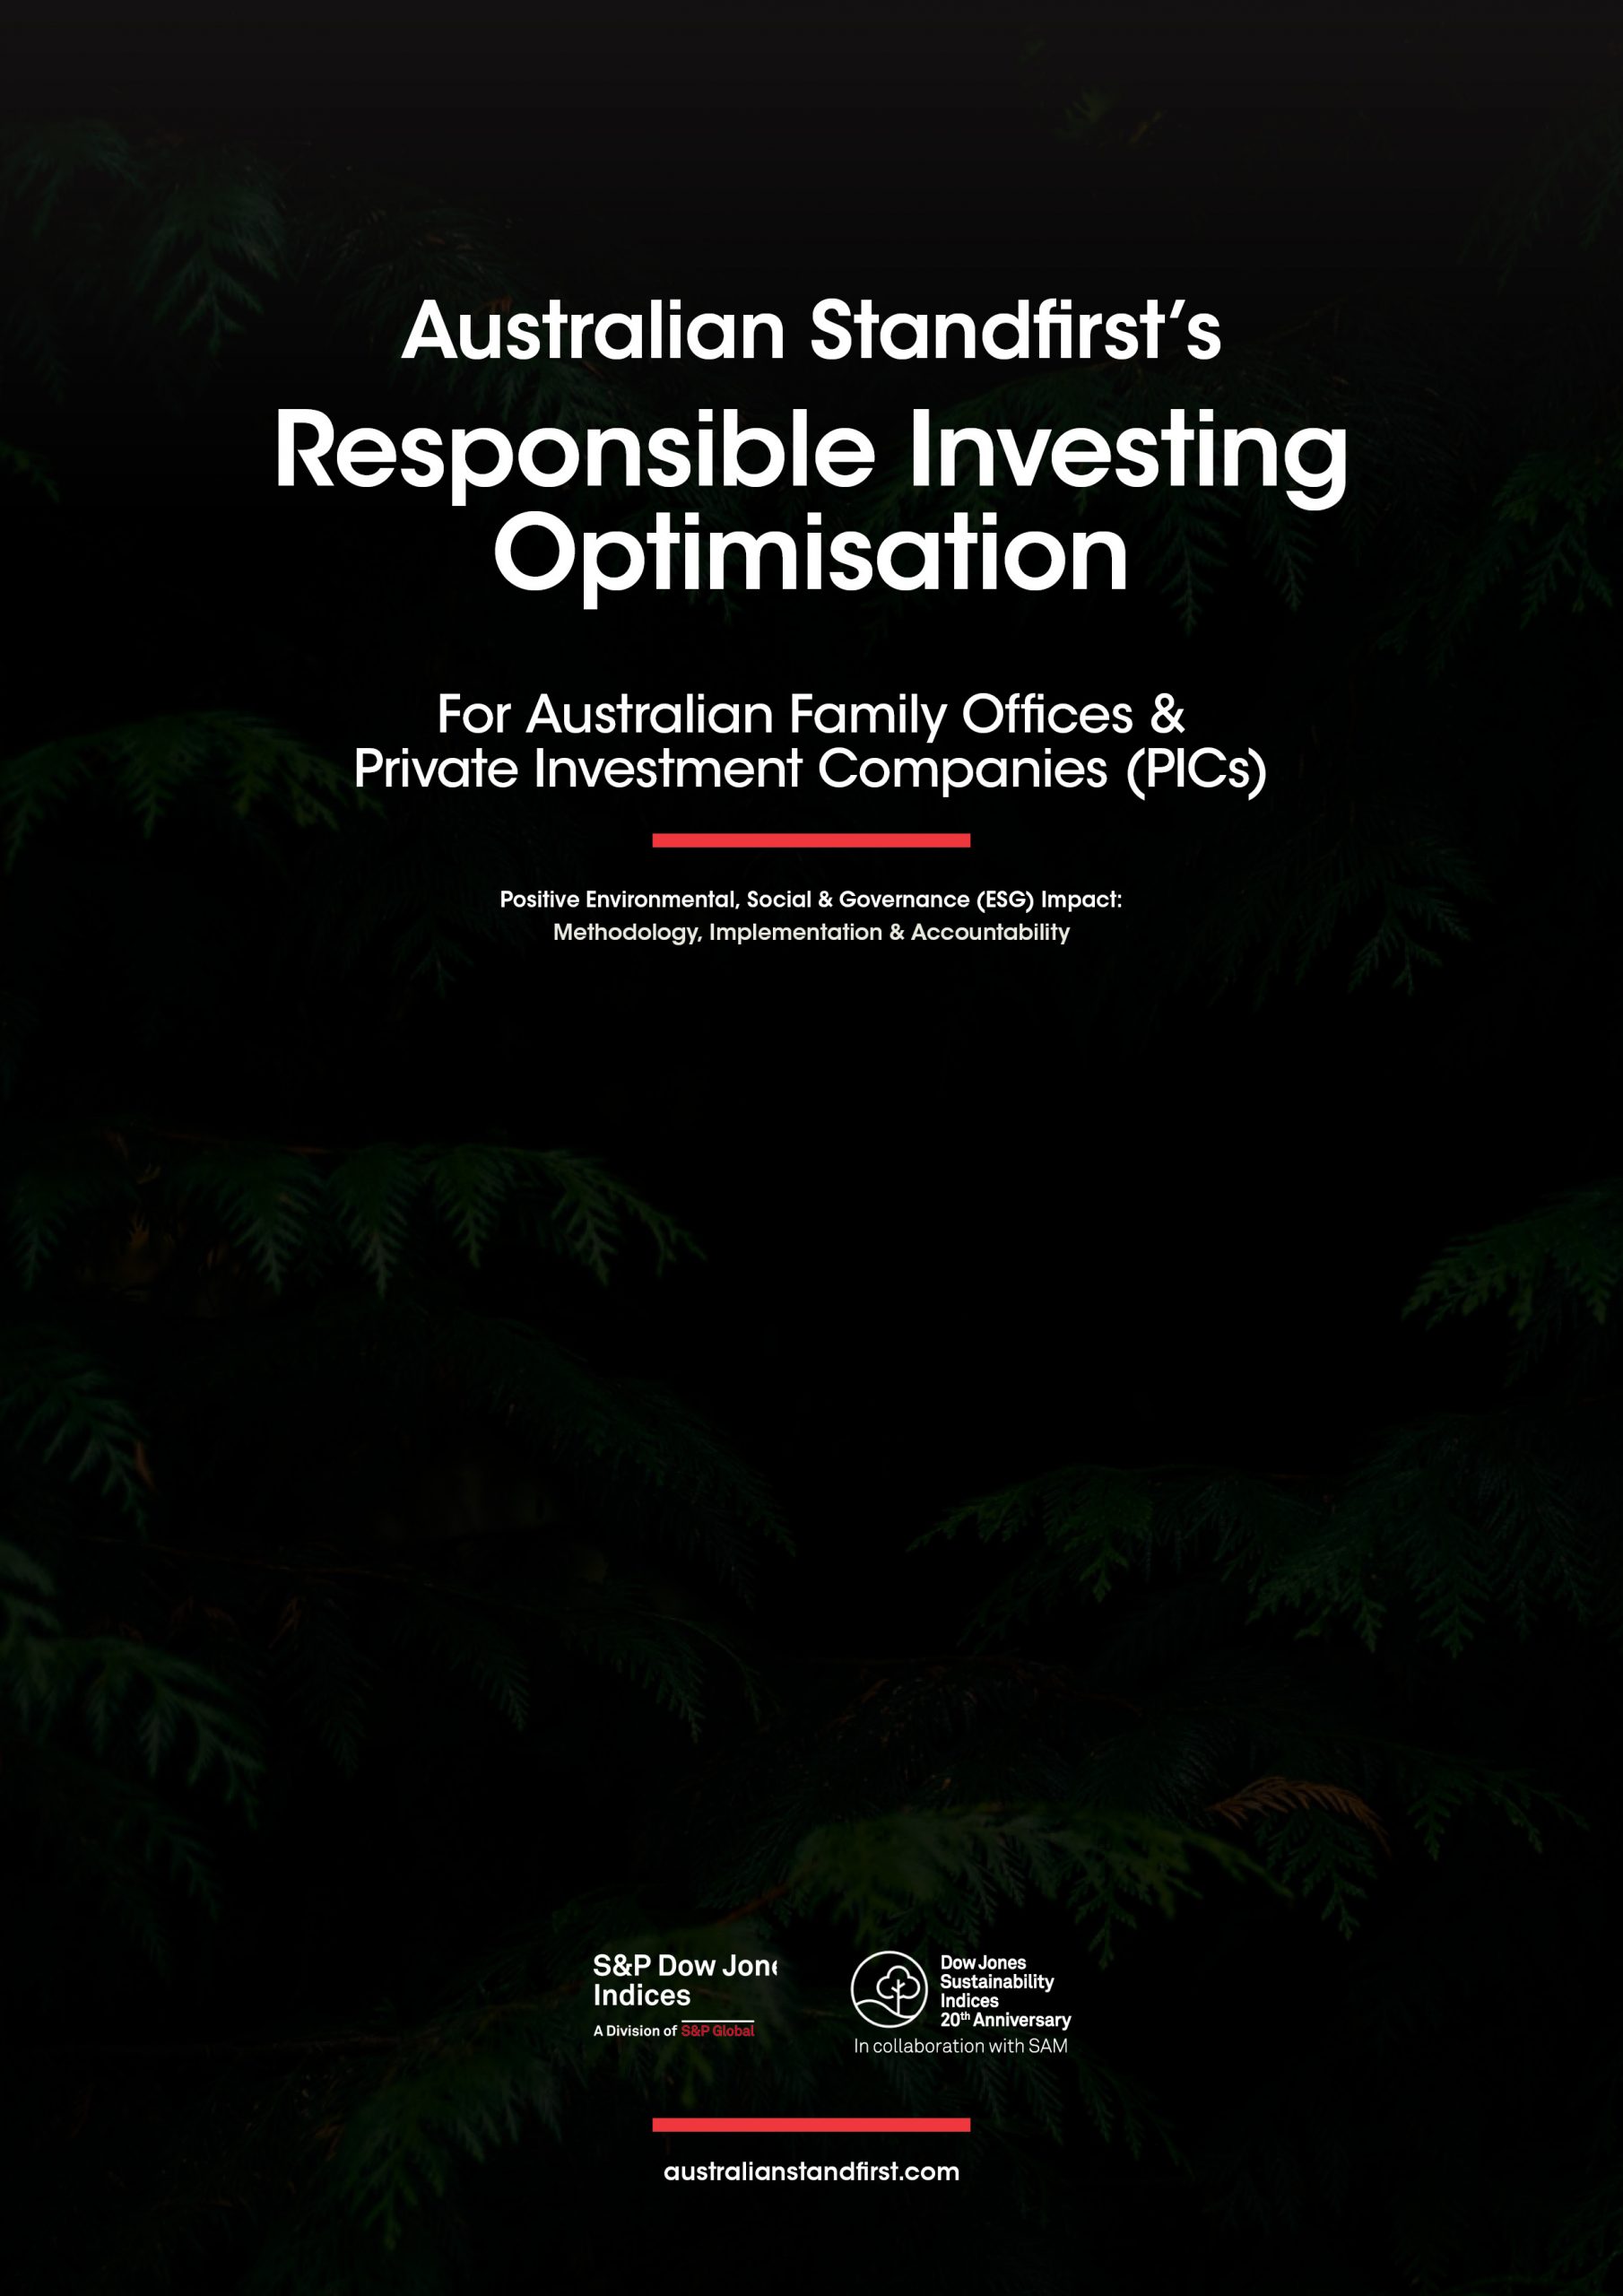 Australian_Standfirst_FO_PIC_Responsible_Investing_Optimisation